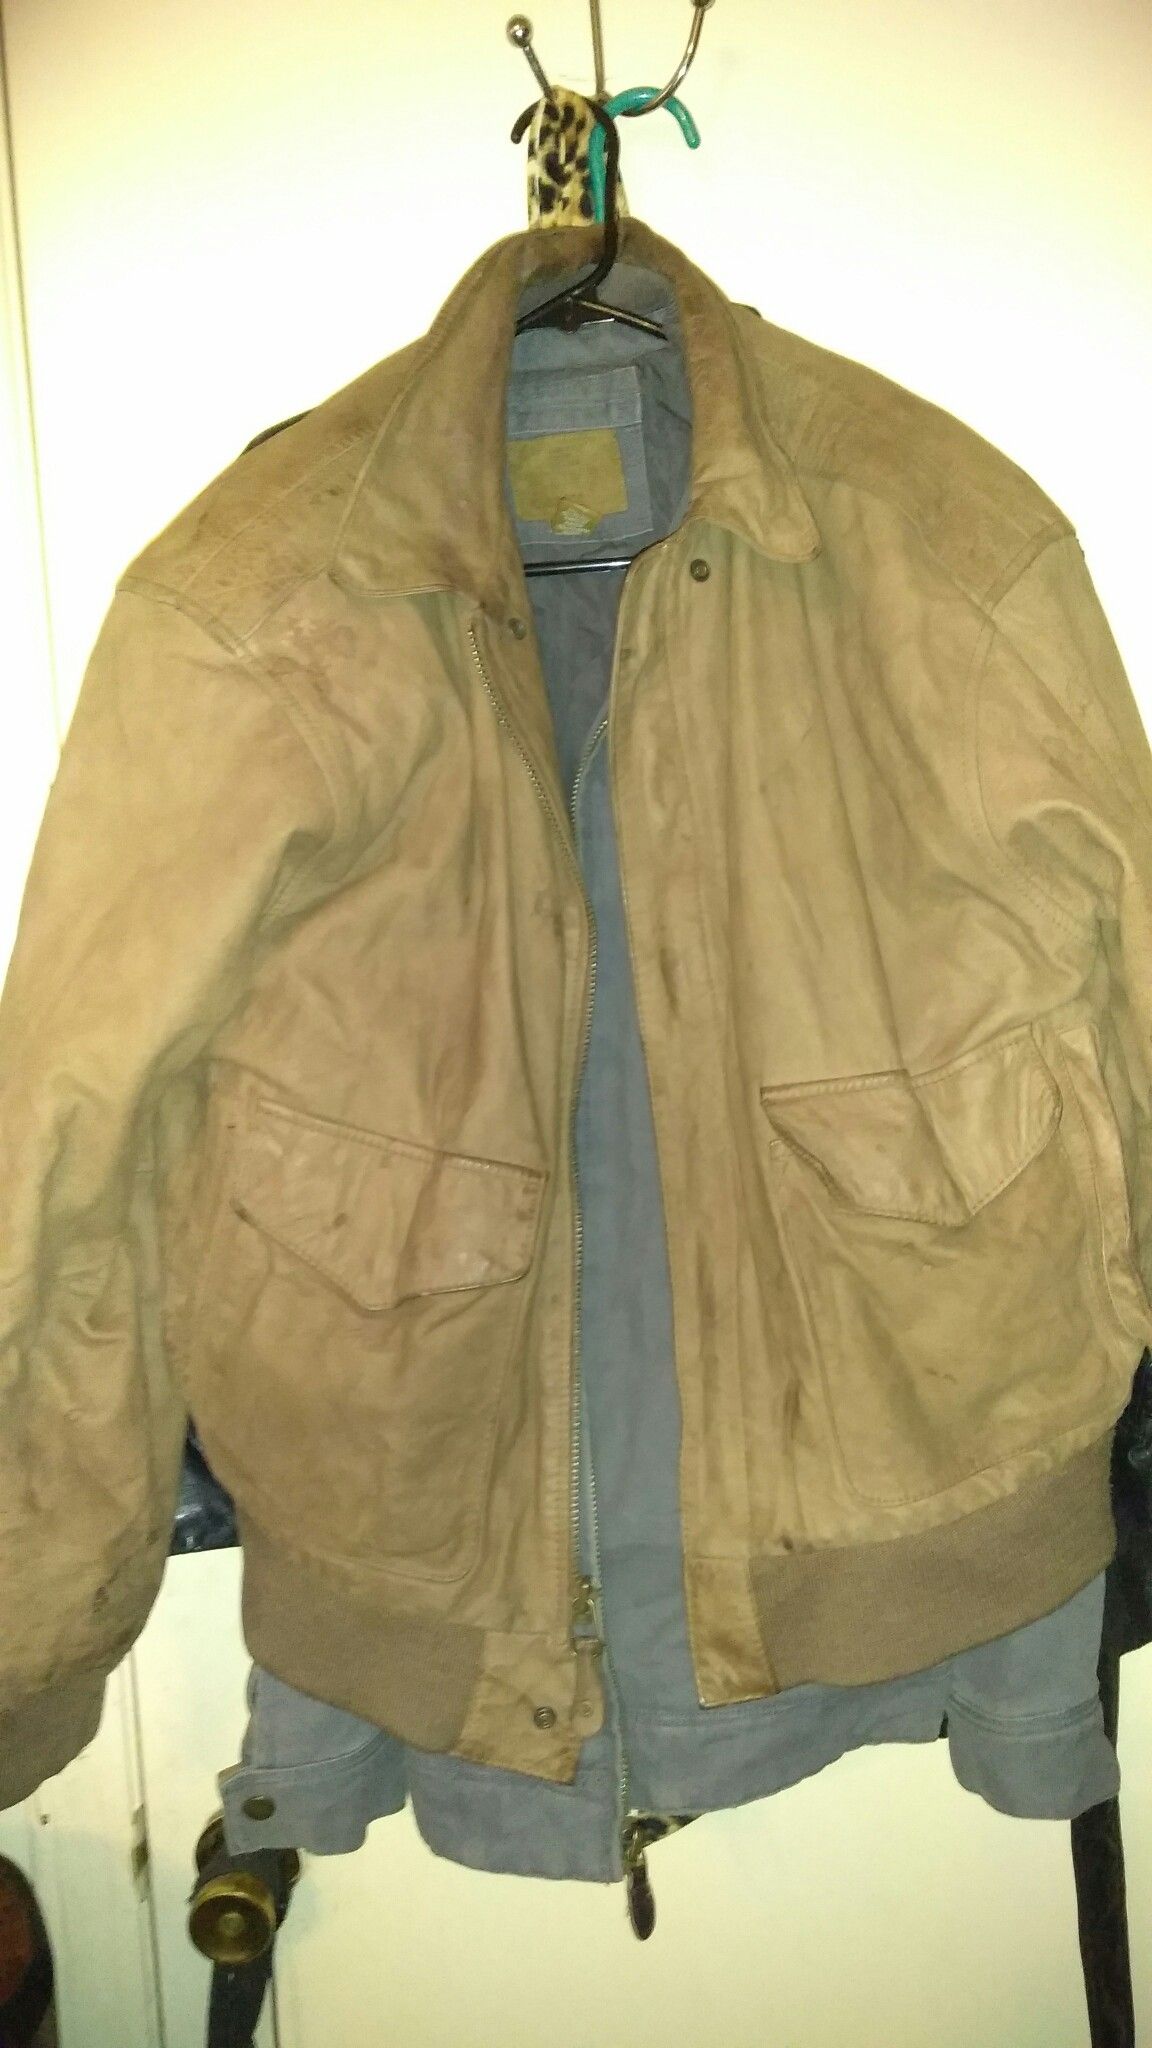 G lll, BROWN SUEDE BOMBER JACKET SIZE LARGE